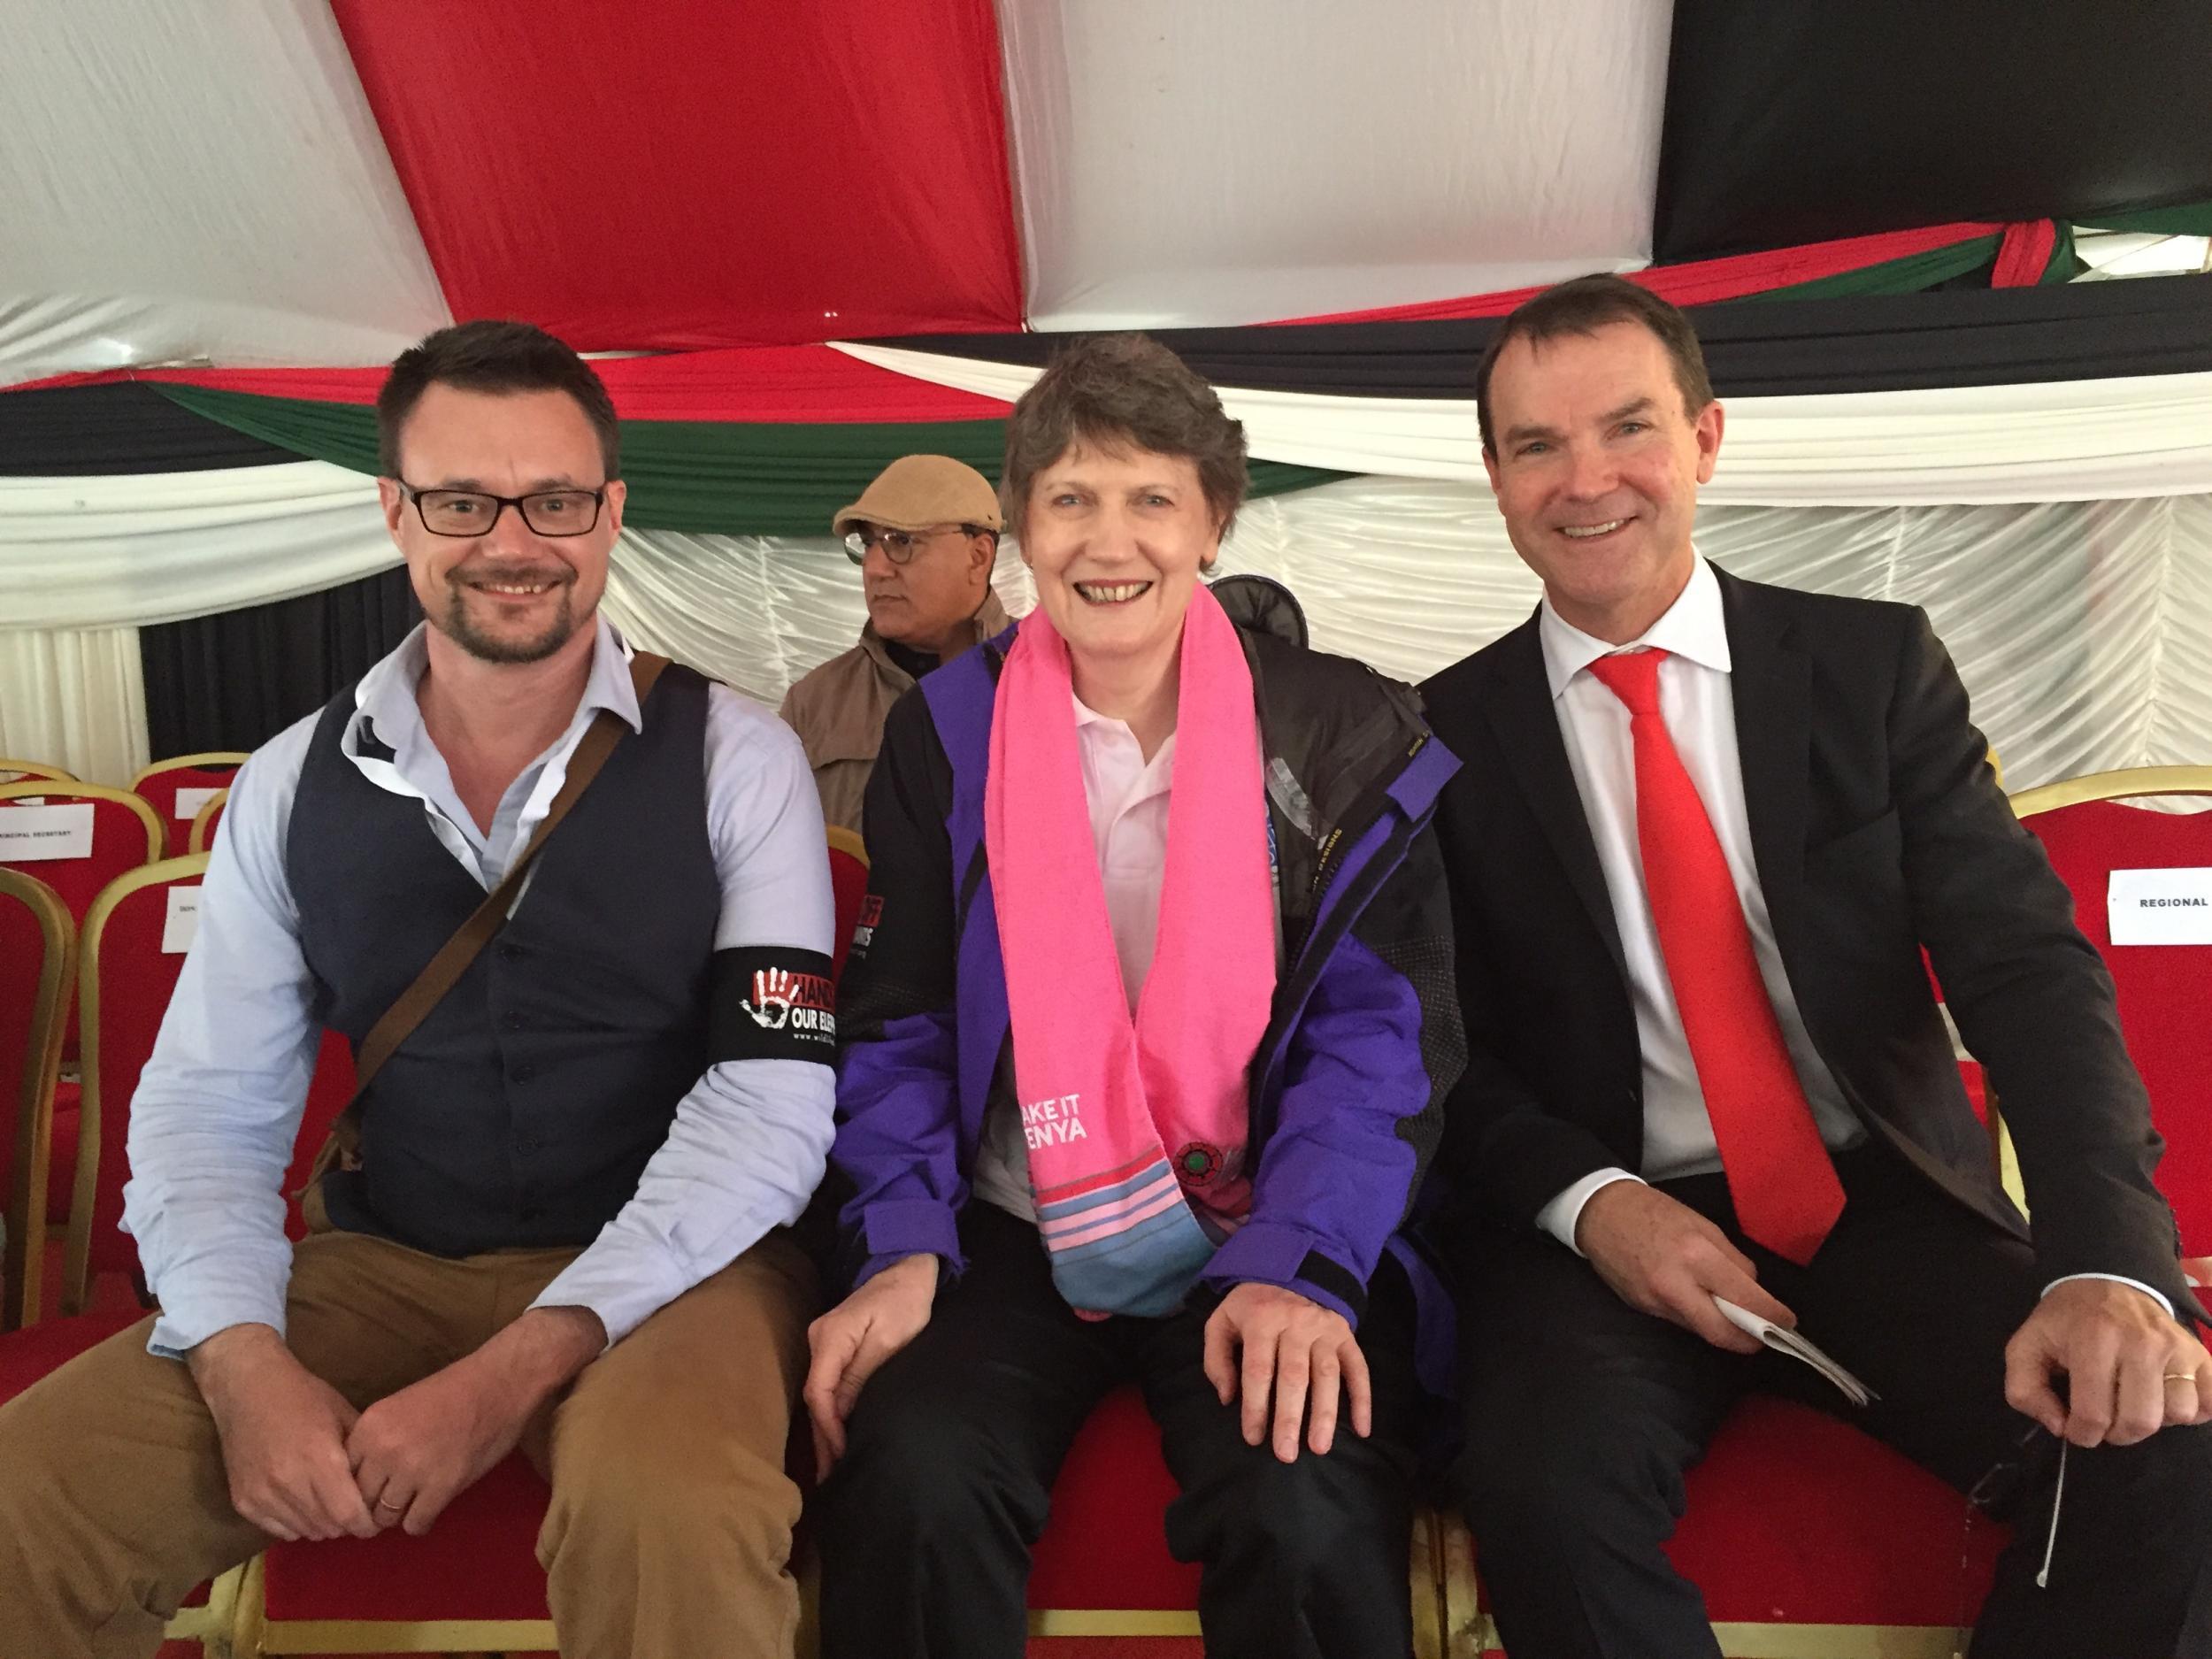 Paul Harrison (left) with Helen Clark of the UNDP and John Scanlon of CITES